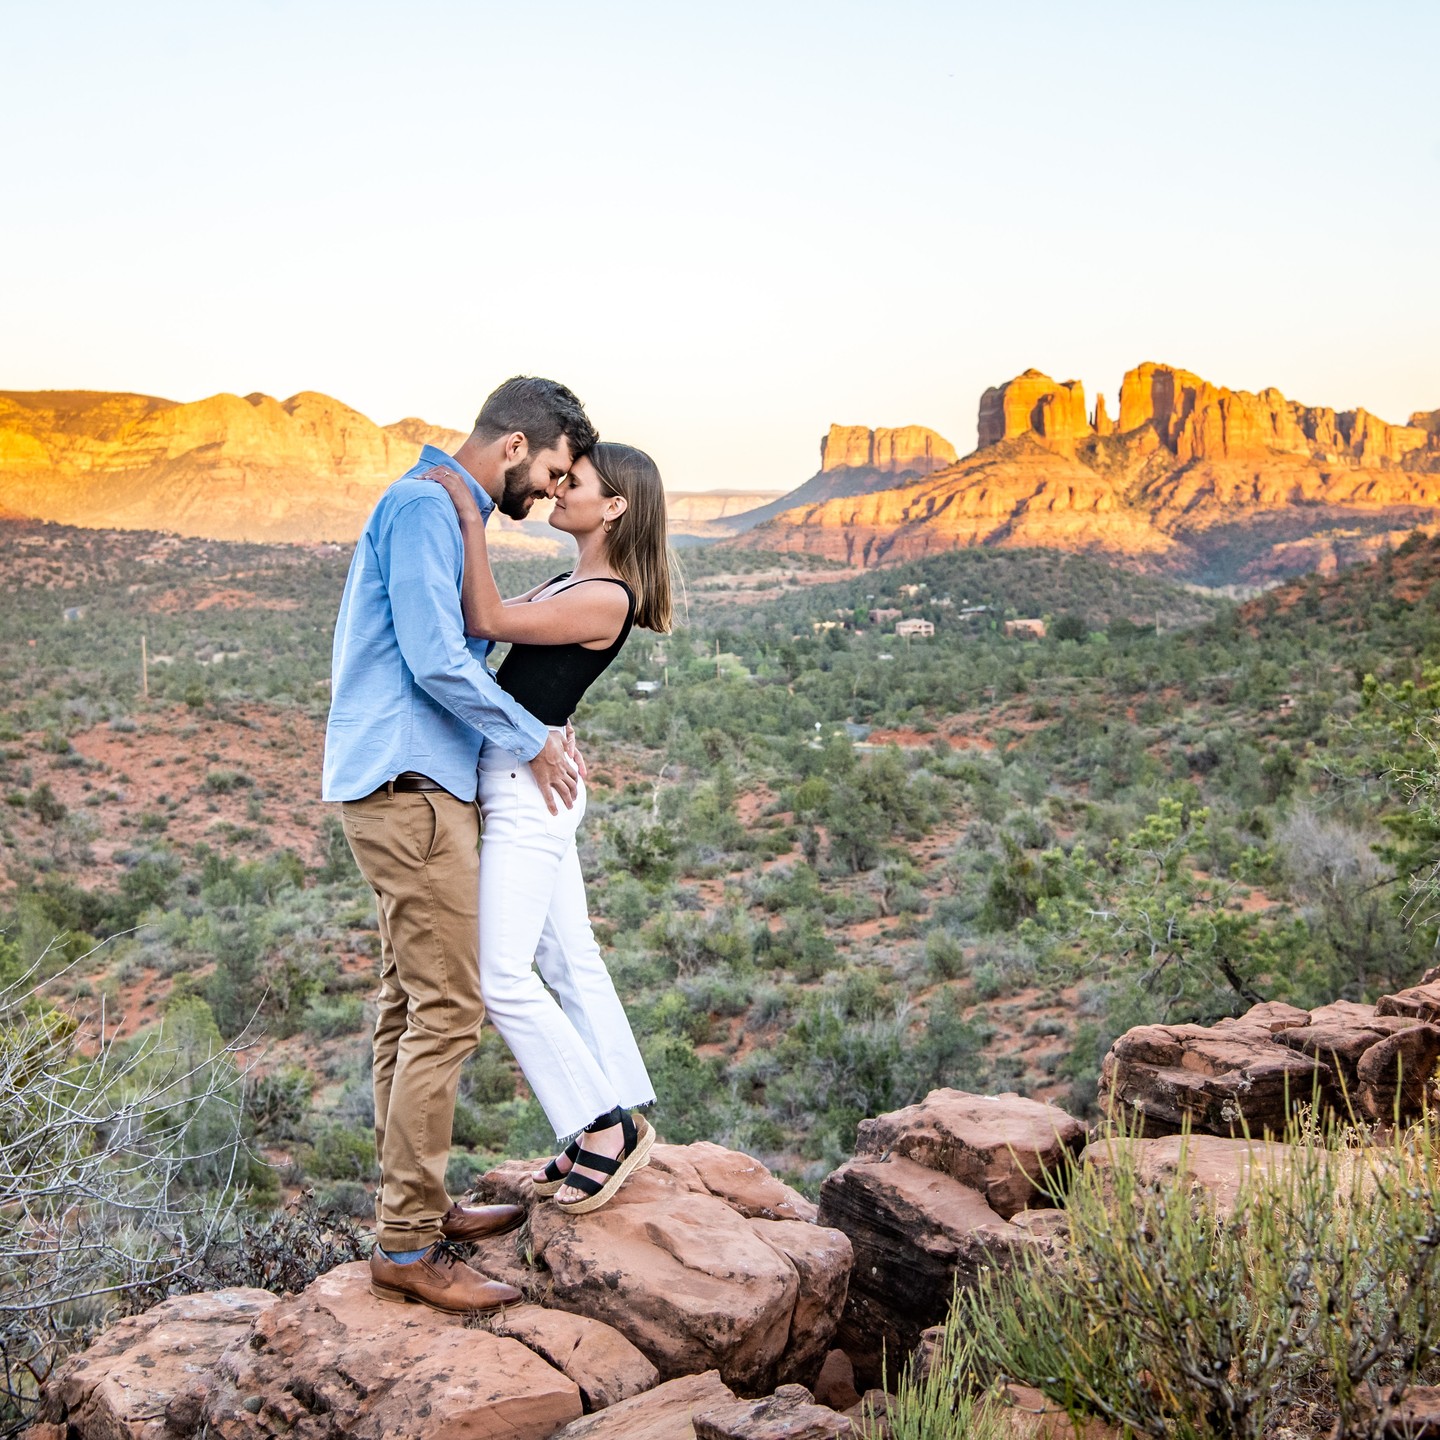 Surprise proposal at Lover's Knoll! #sedonaphotographer #sedonaphotographers #sedonaphotography #sedonaportraitphotographer #sedonaportraitphotography #sedonaportraits #sedonaproposal #sedonaproposalphotographer #sedonaproposals #lisagarrettphotography #arizonaproposalphotographer #arizonaphotographer #sedonaphotoshoot #loversknollsedona #sedonaloversknoll #loversknoll #loversknollelopement #sedonacouplesphotographer #sedonacouplessession #sedonacoupleshoot #sedonaengagementphotographer #sedonaengagementsession #sedonaengagementphotography